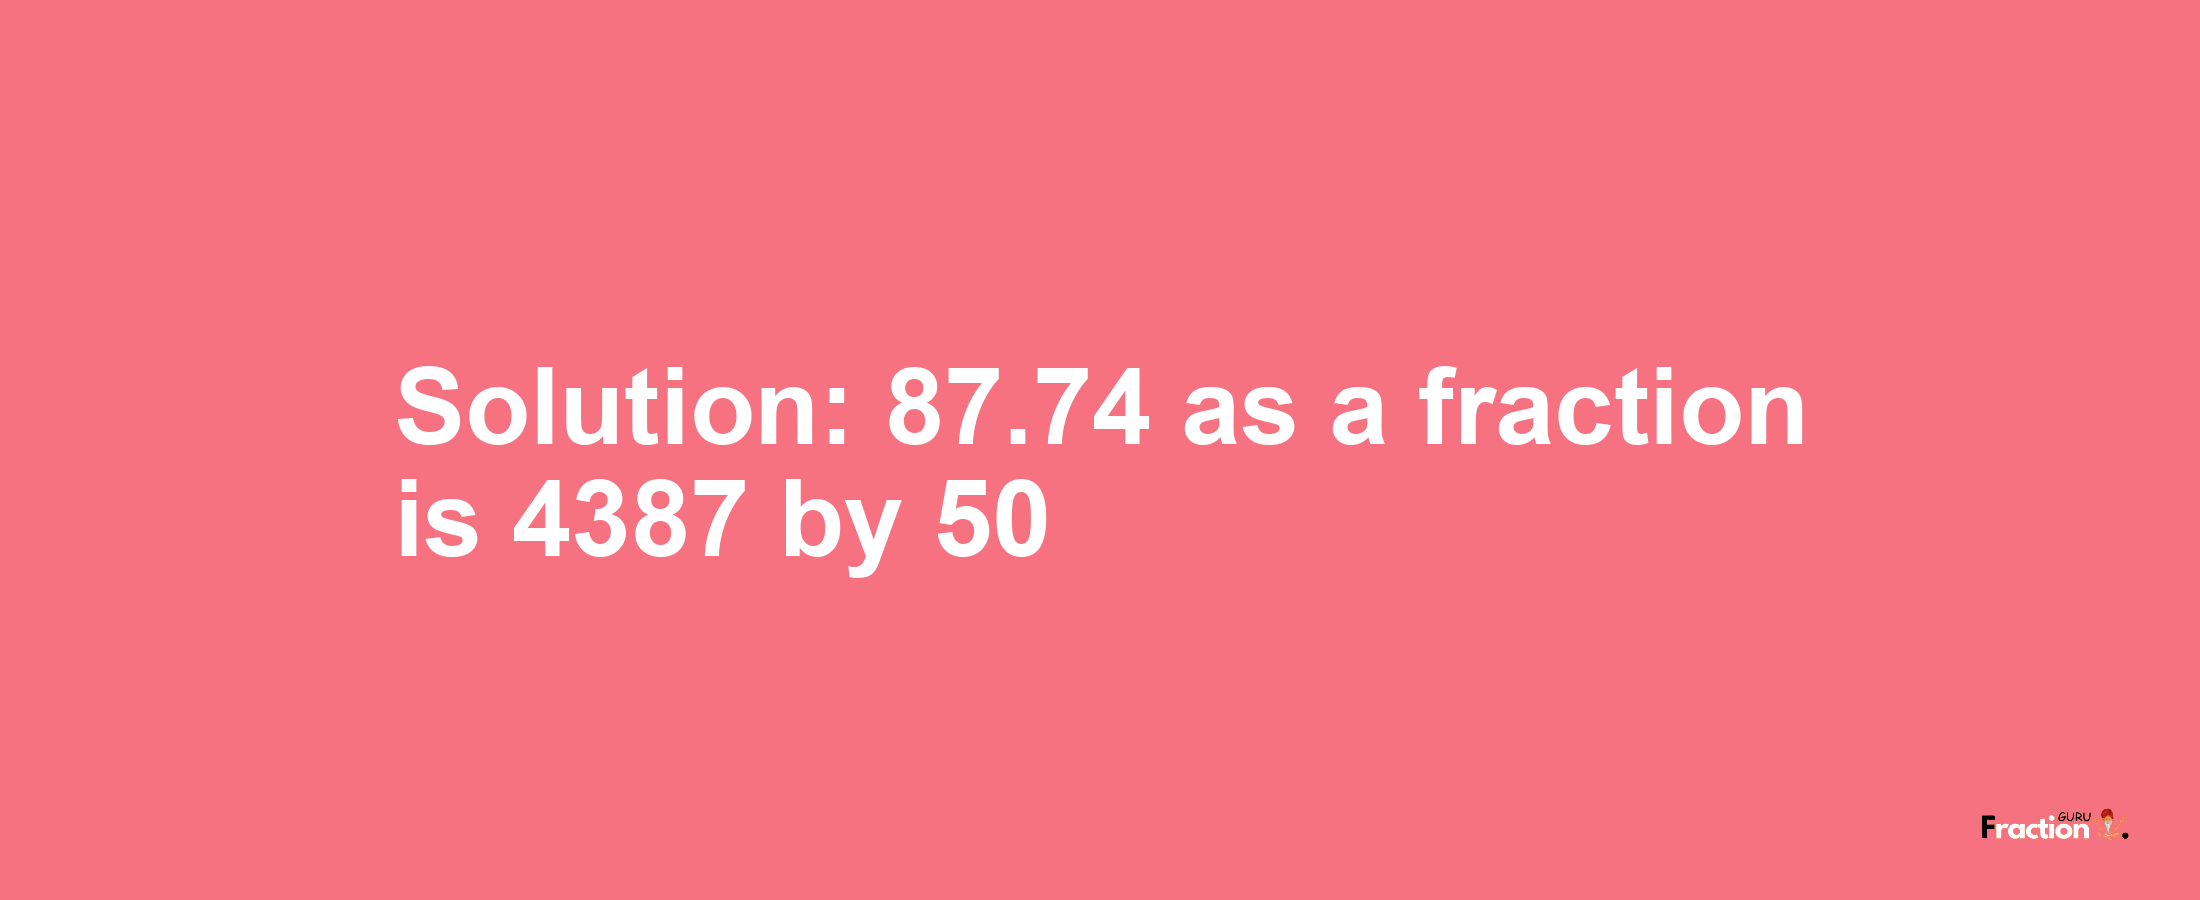 Solution:87.74 as a fraction is 4387/50